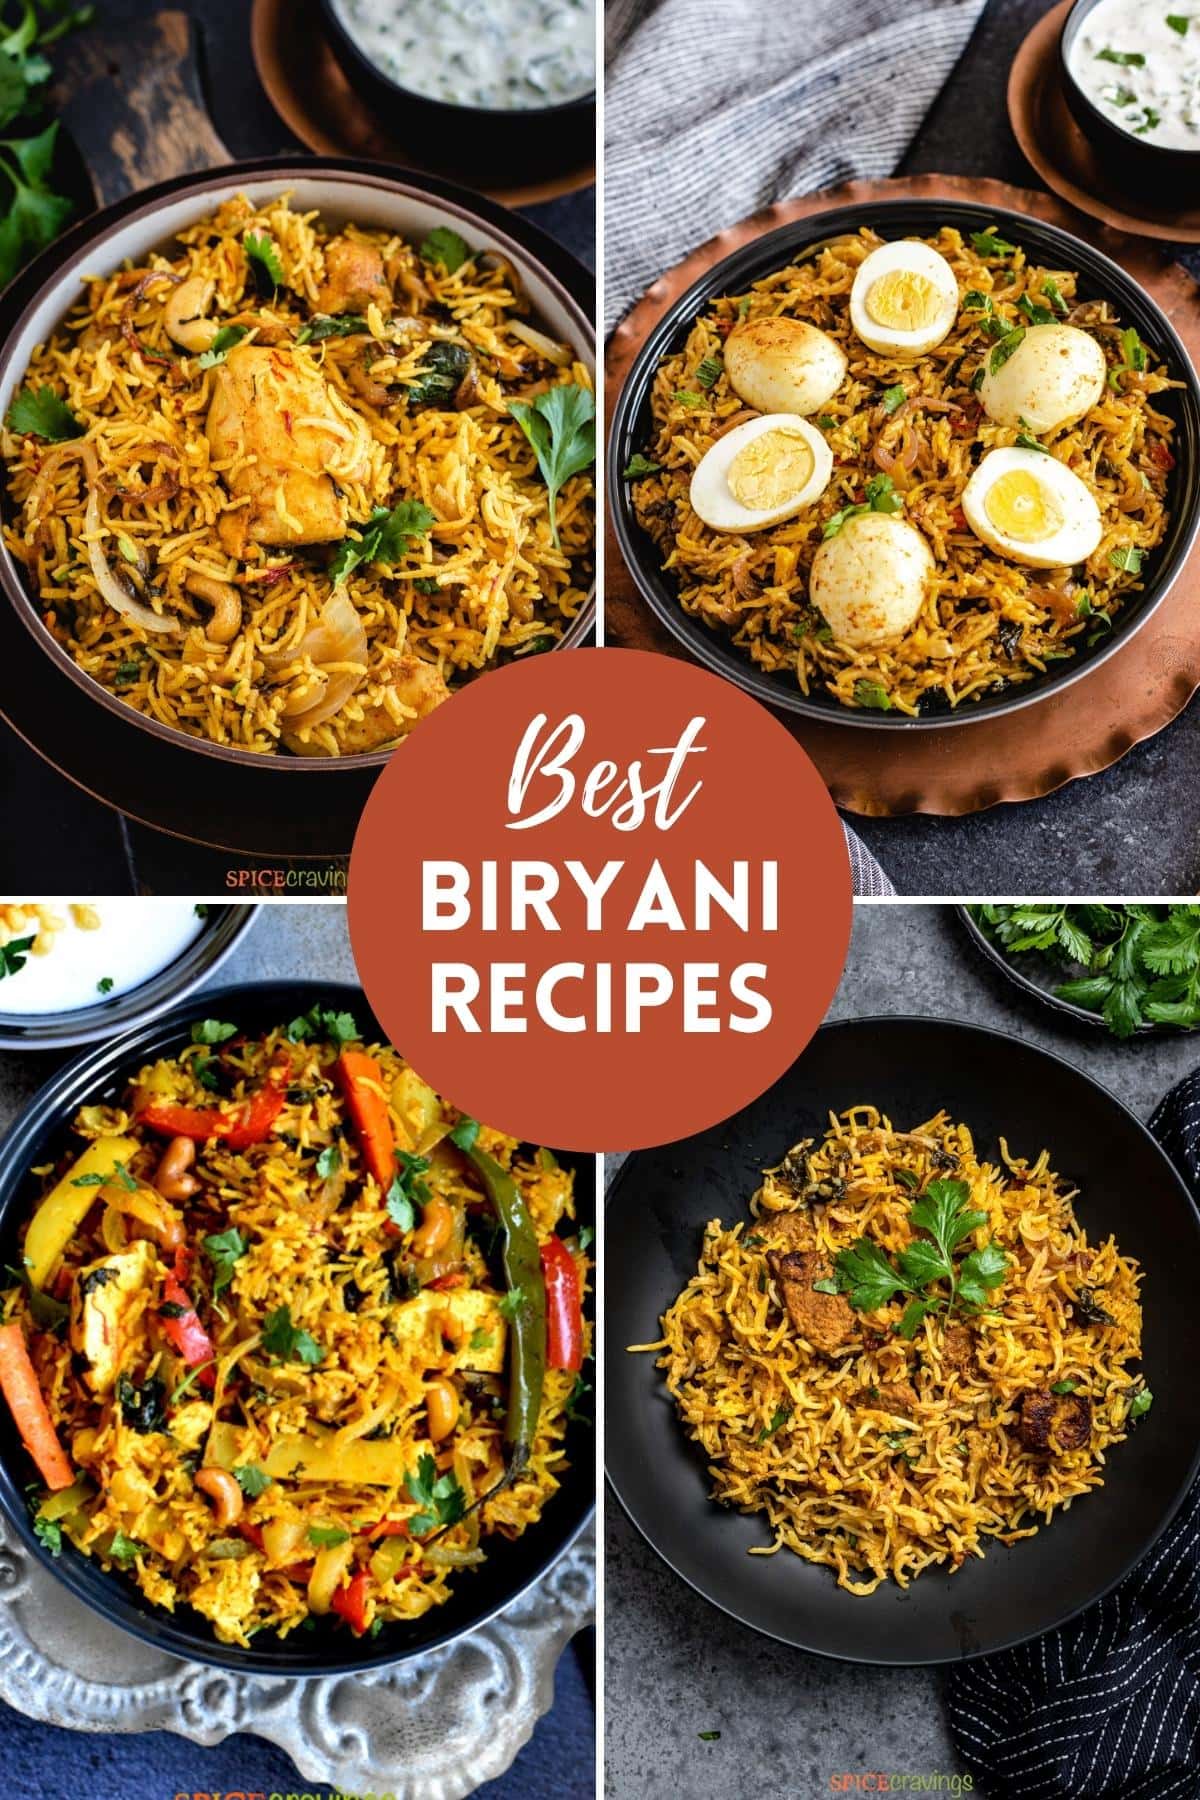 4-image grid showing biryani recipes featuring chicken, egg, vegetables and lamb